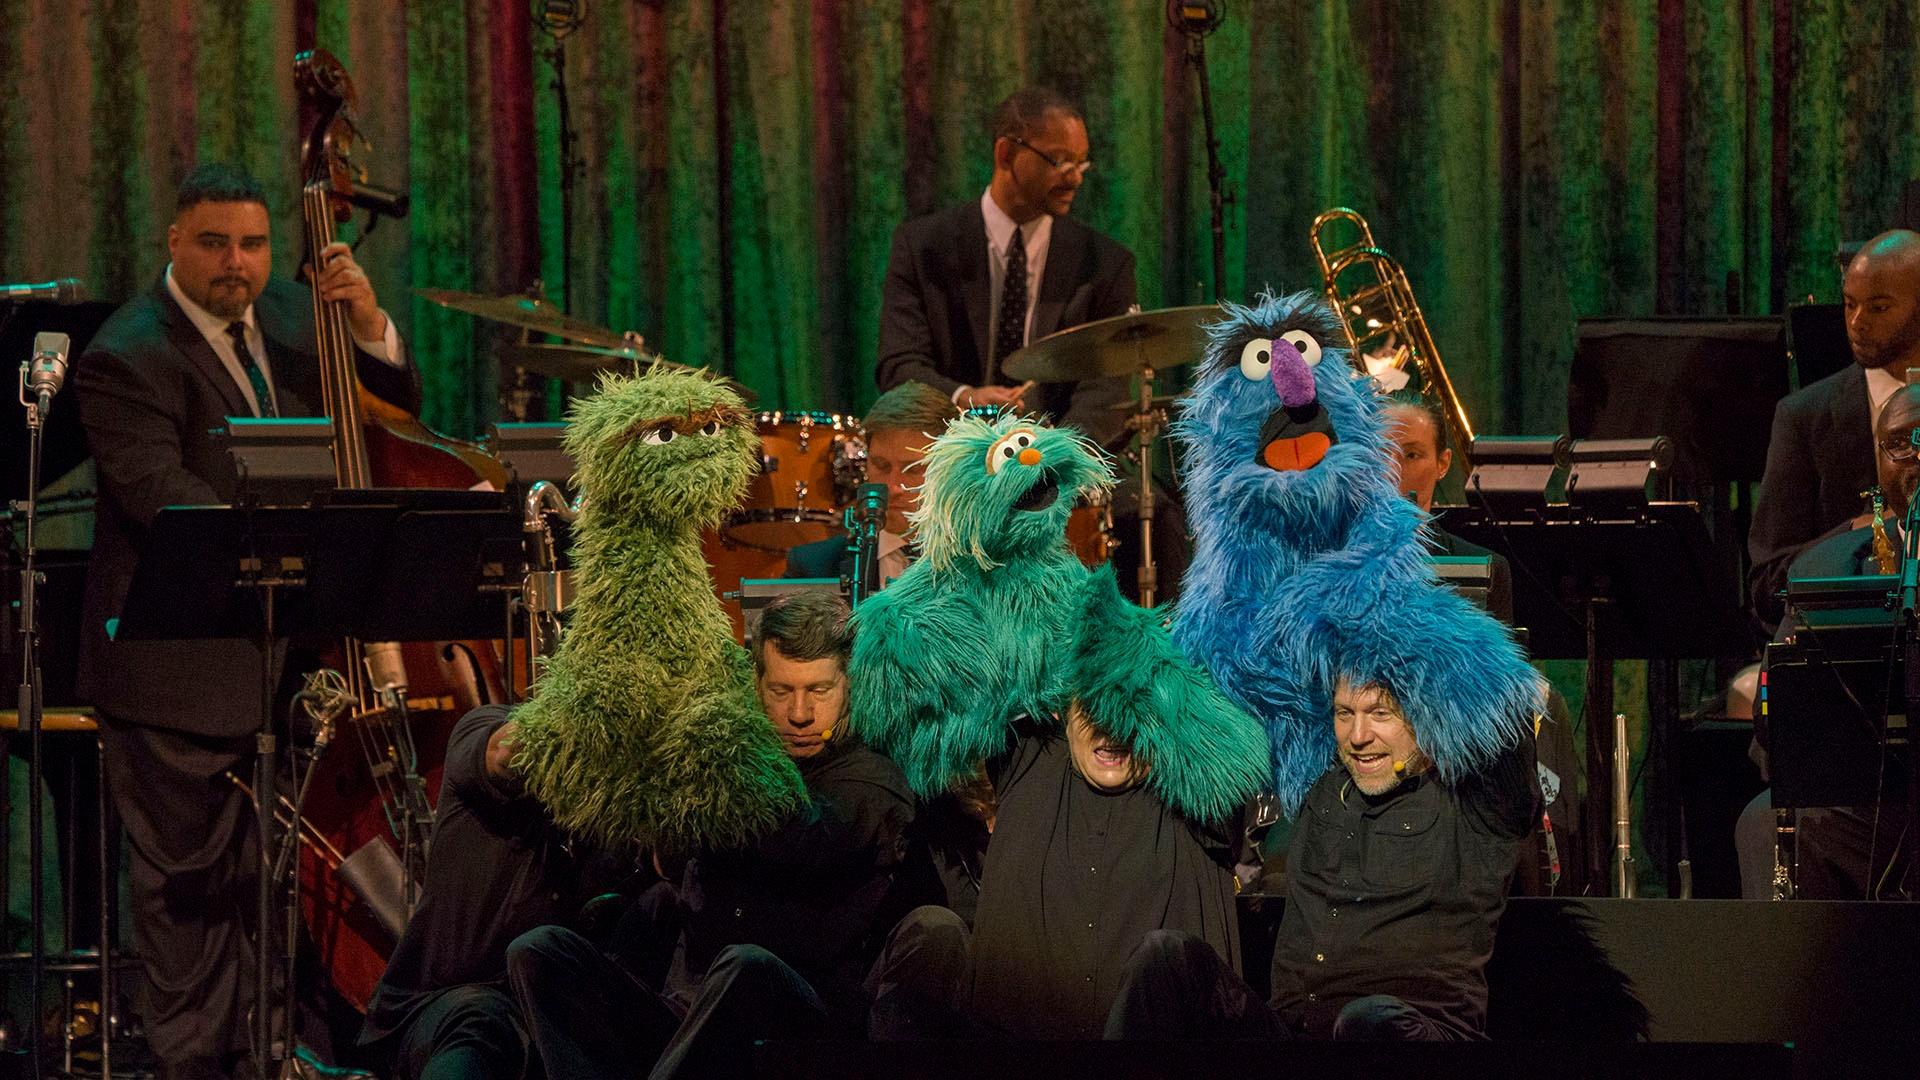 Image of Oscar the Grouch, Rosita, and Herry Monster on stage singing "One of These Things."